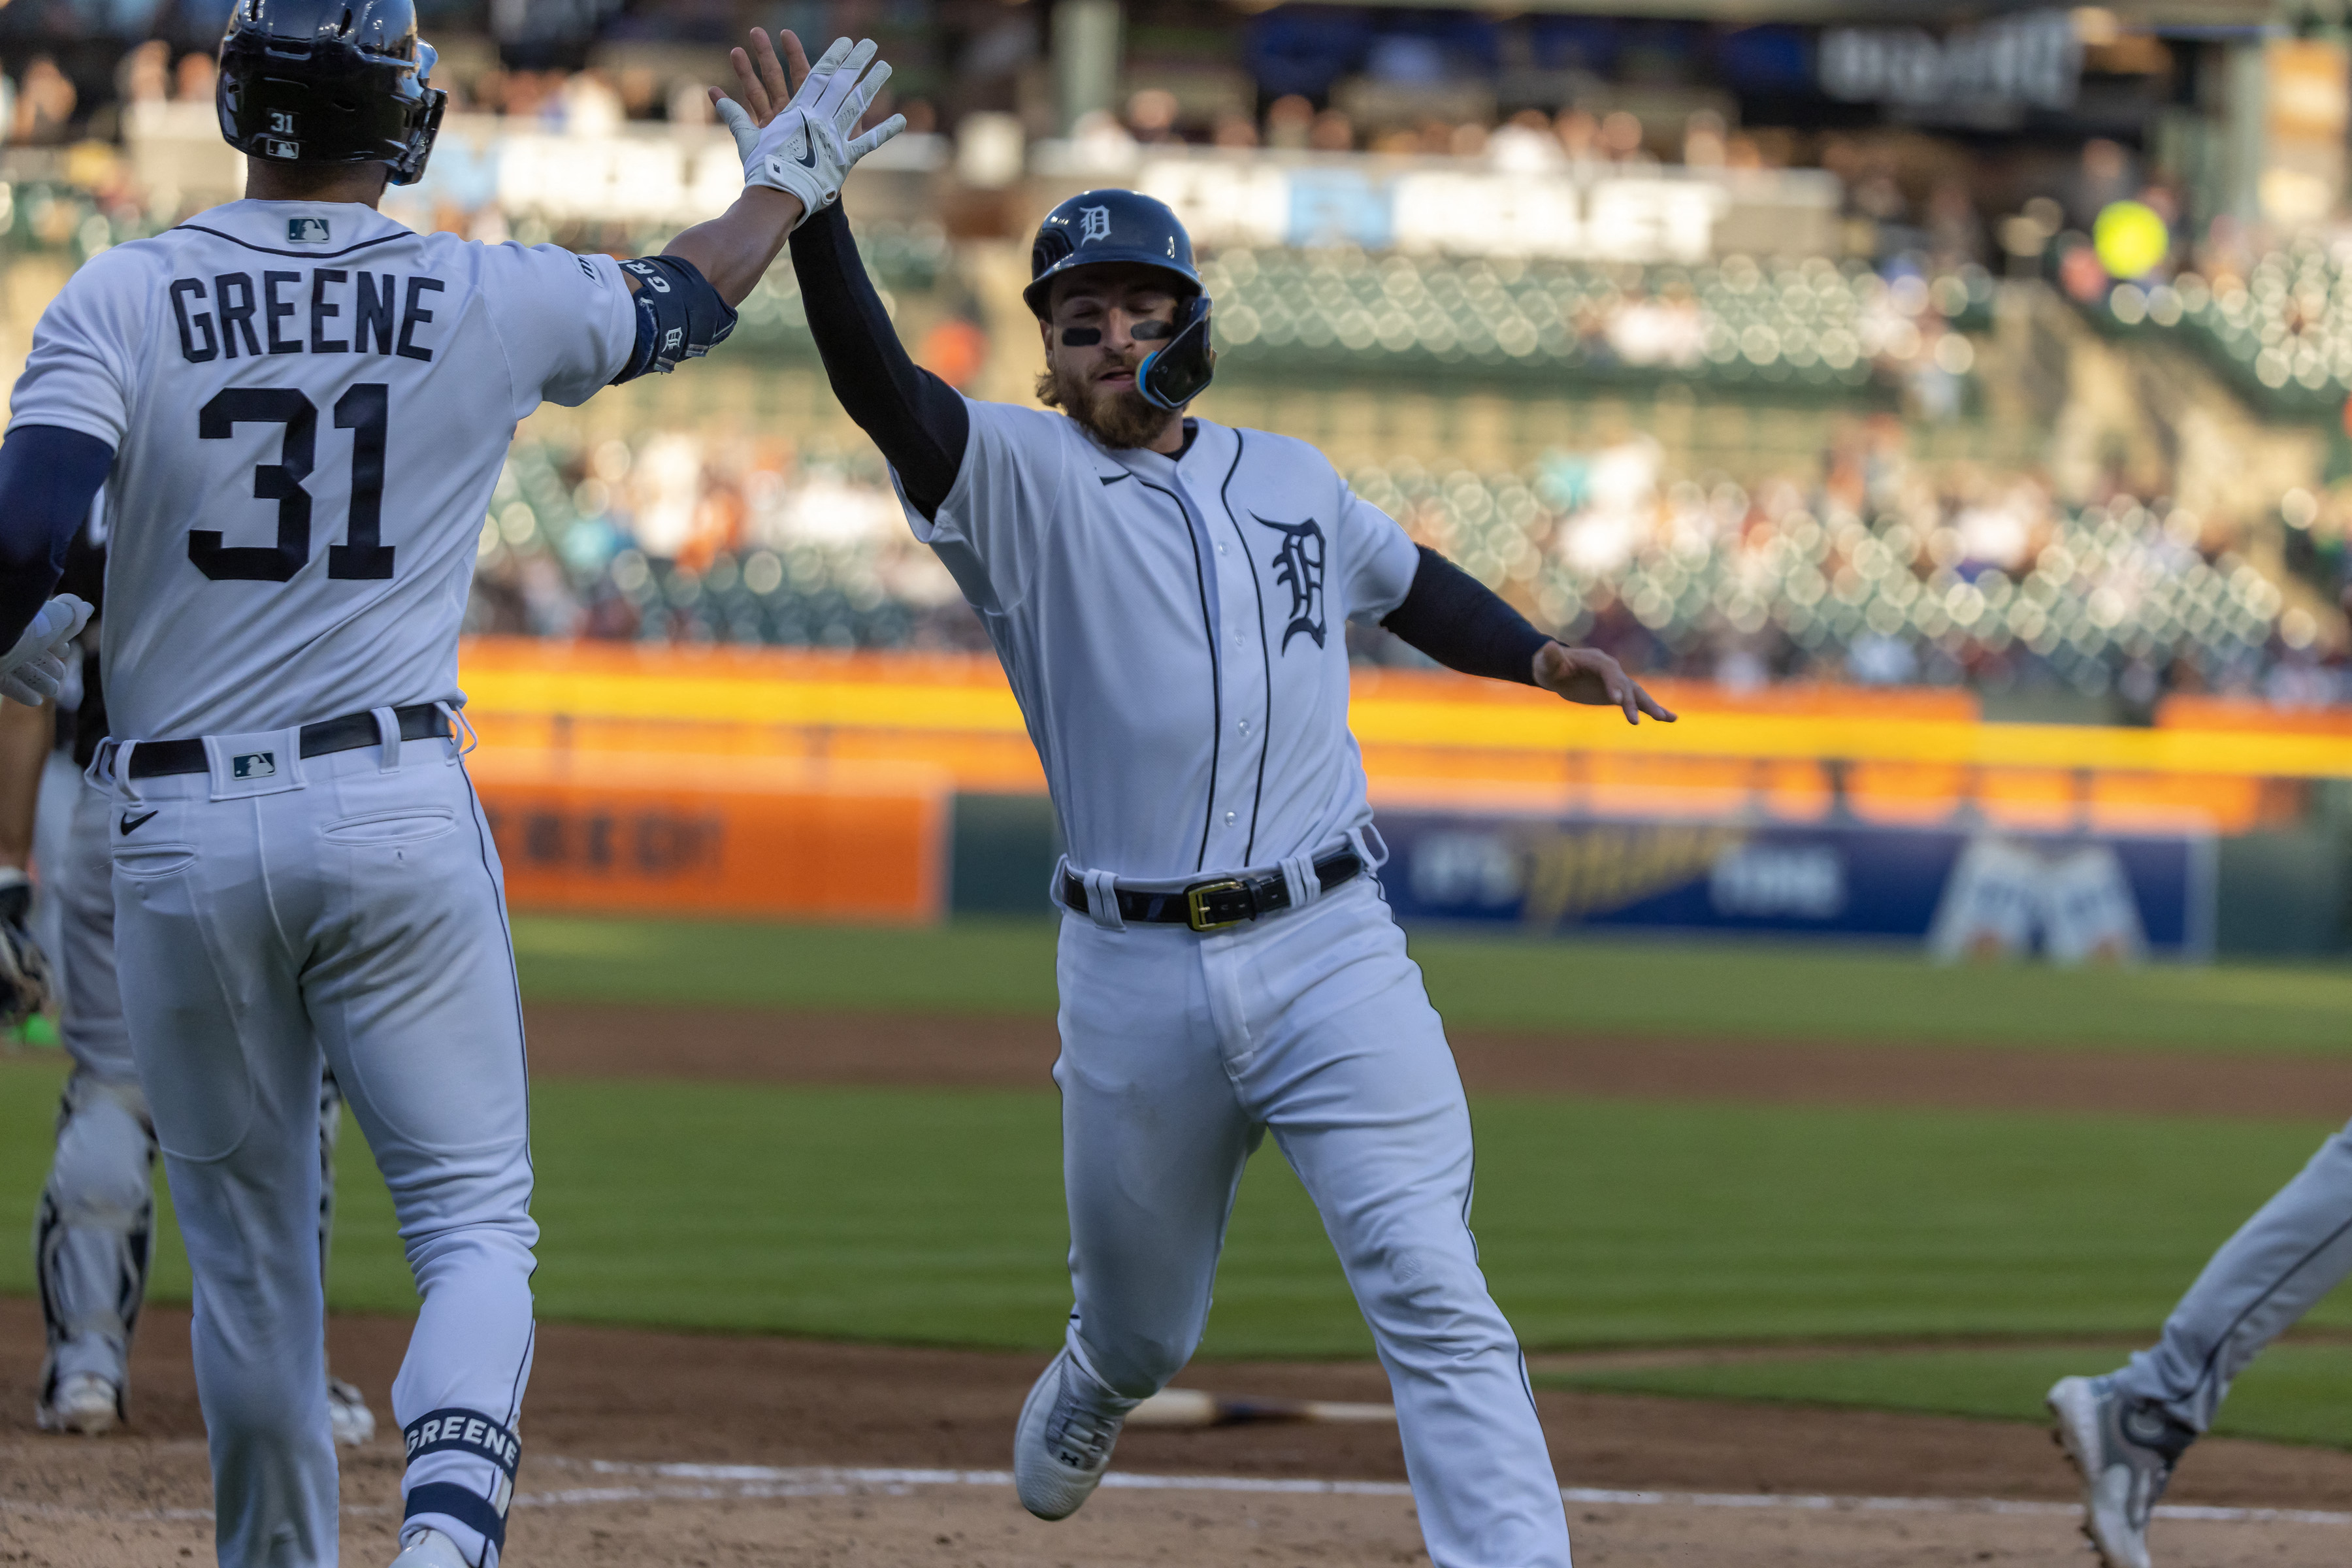 Faedo fans a career-best 10, helping Tigers to a 7-2 win over White Sox